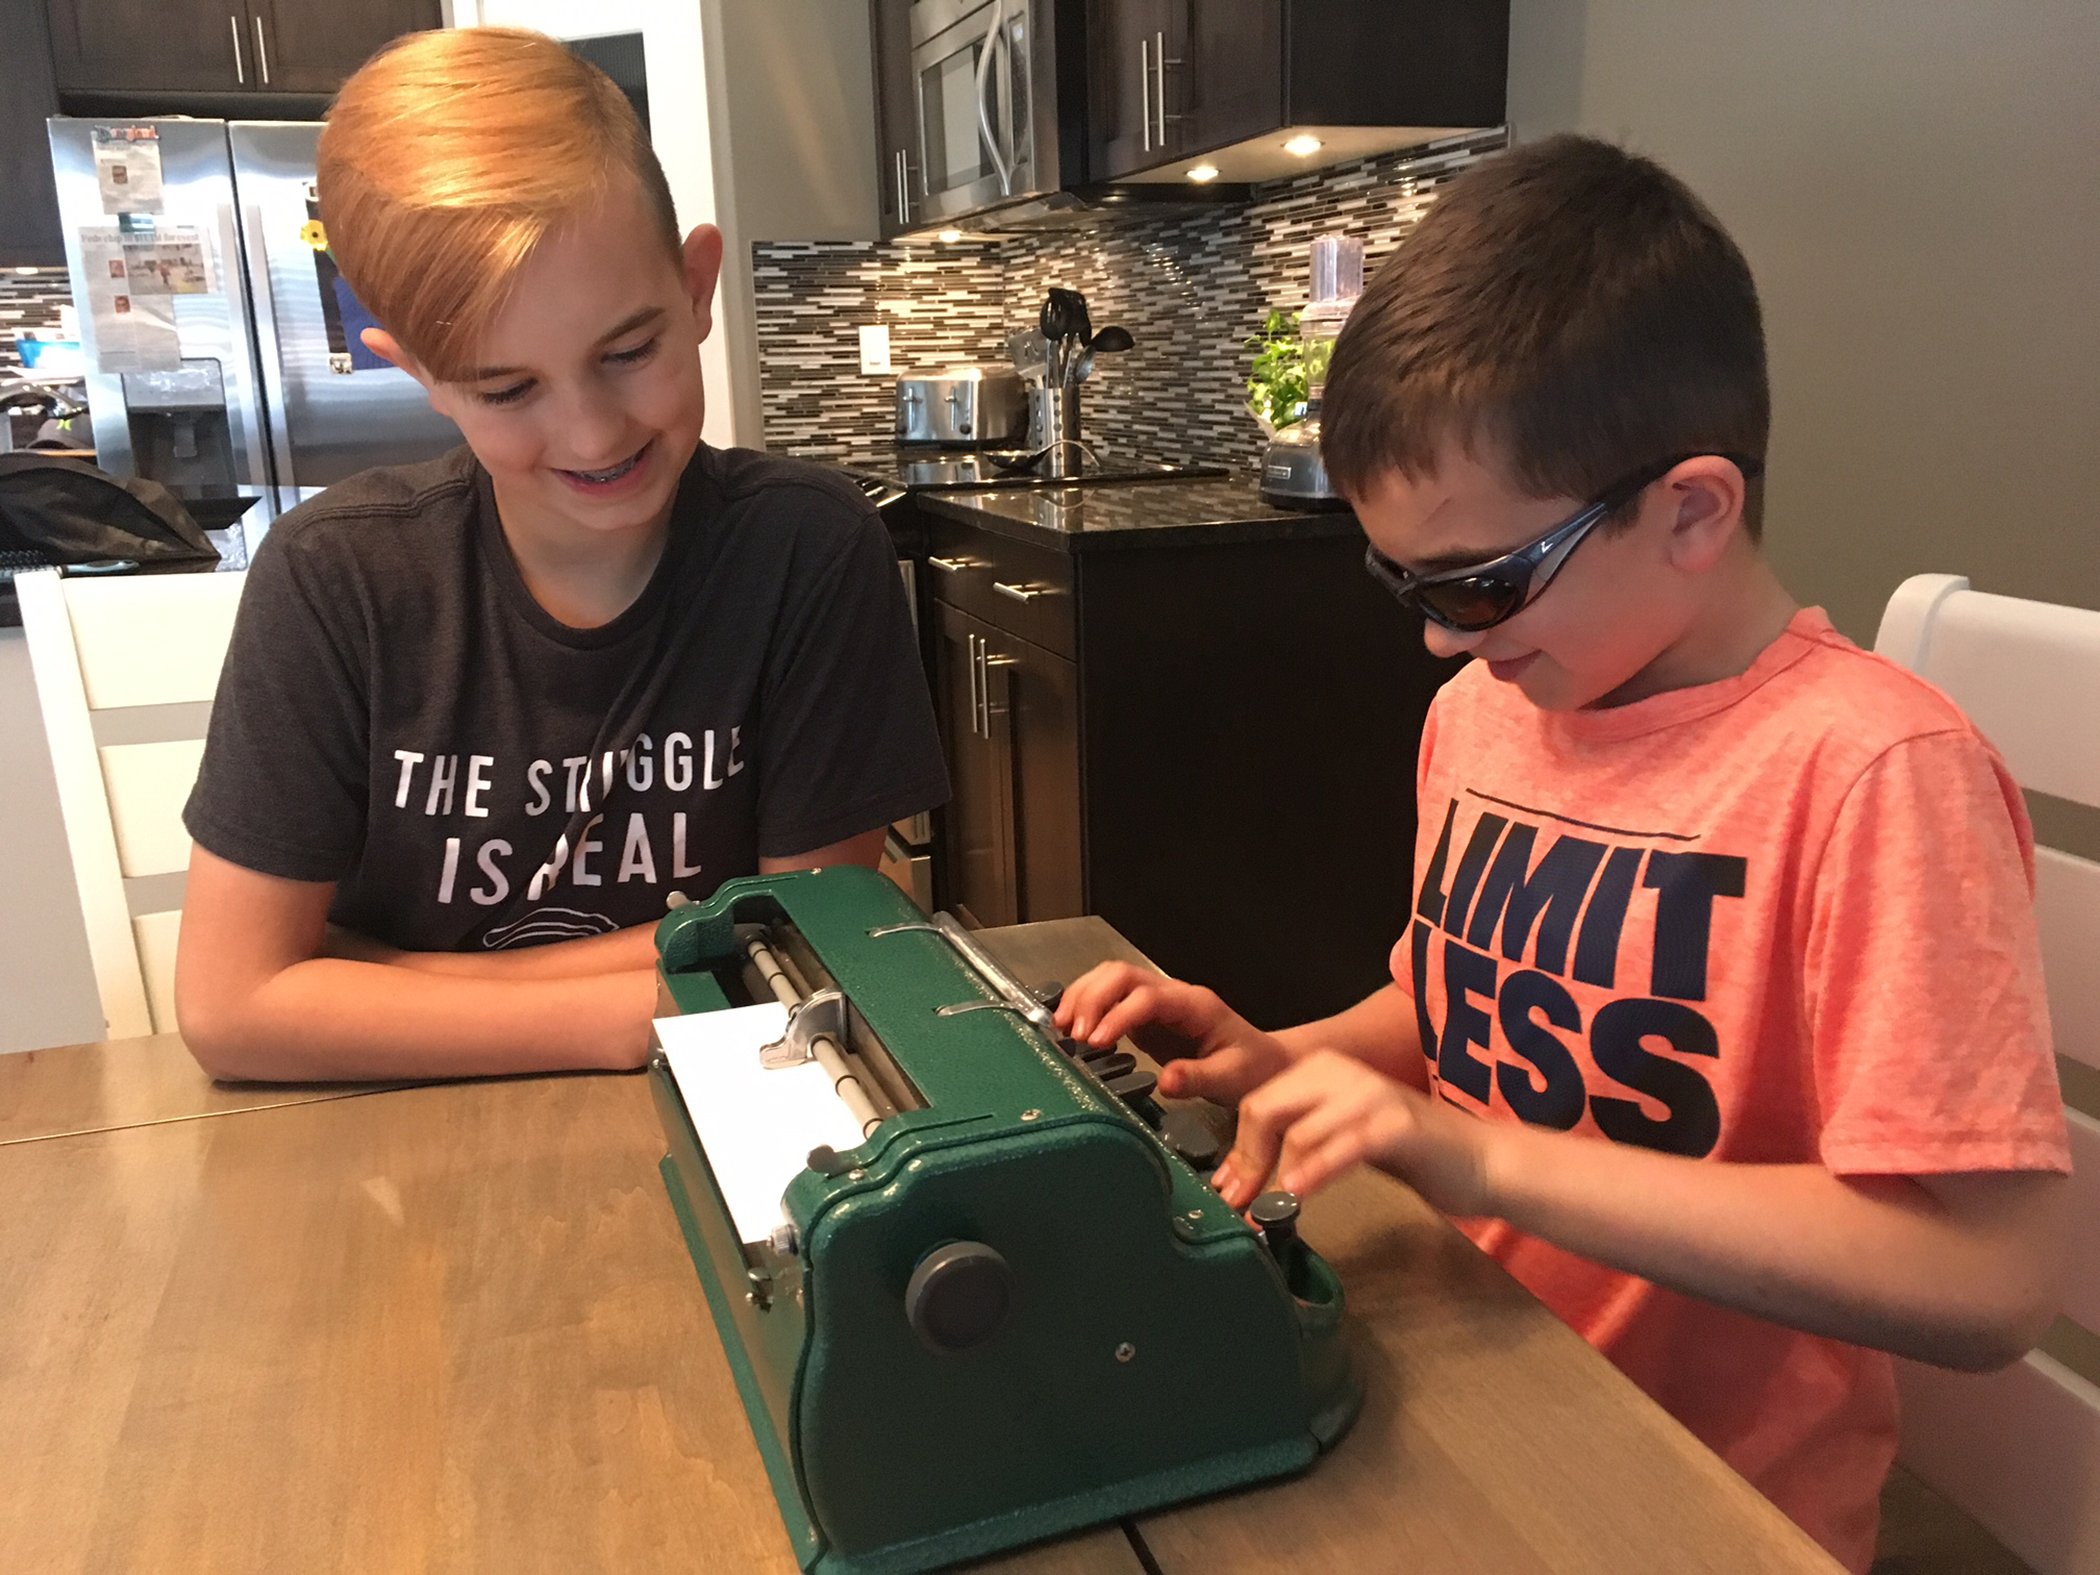 SPECIAL BOND - Caden Johnson (right) types in braille while his brother Brady